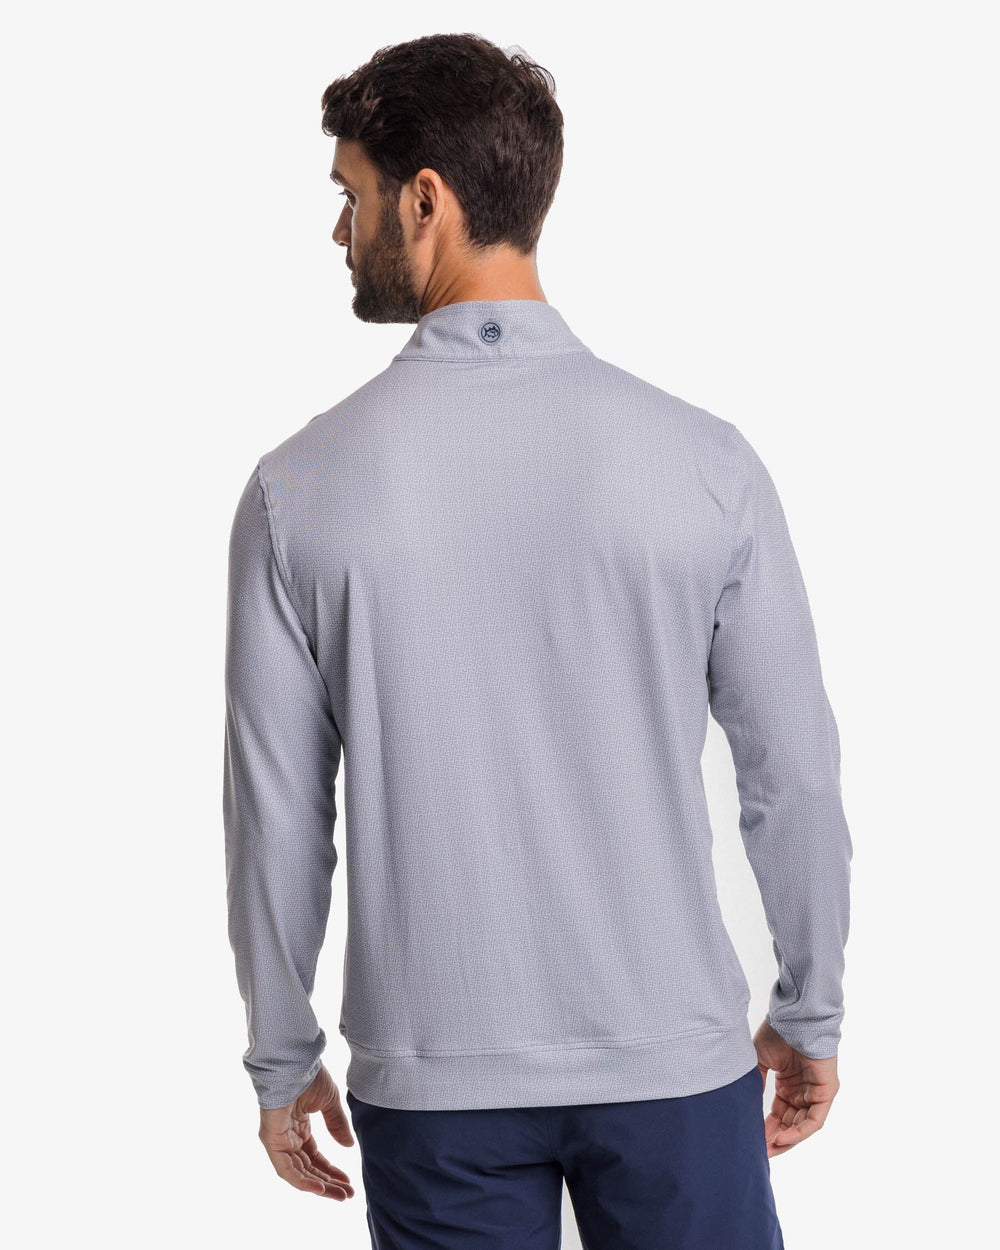 The back view of the Southern Tide Pine Ridge Print Cruiser Quarter Zip Pullover by Southern Tide - Steel Grey